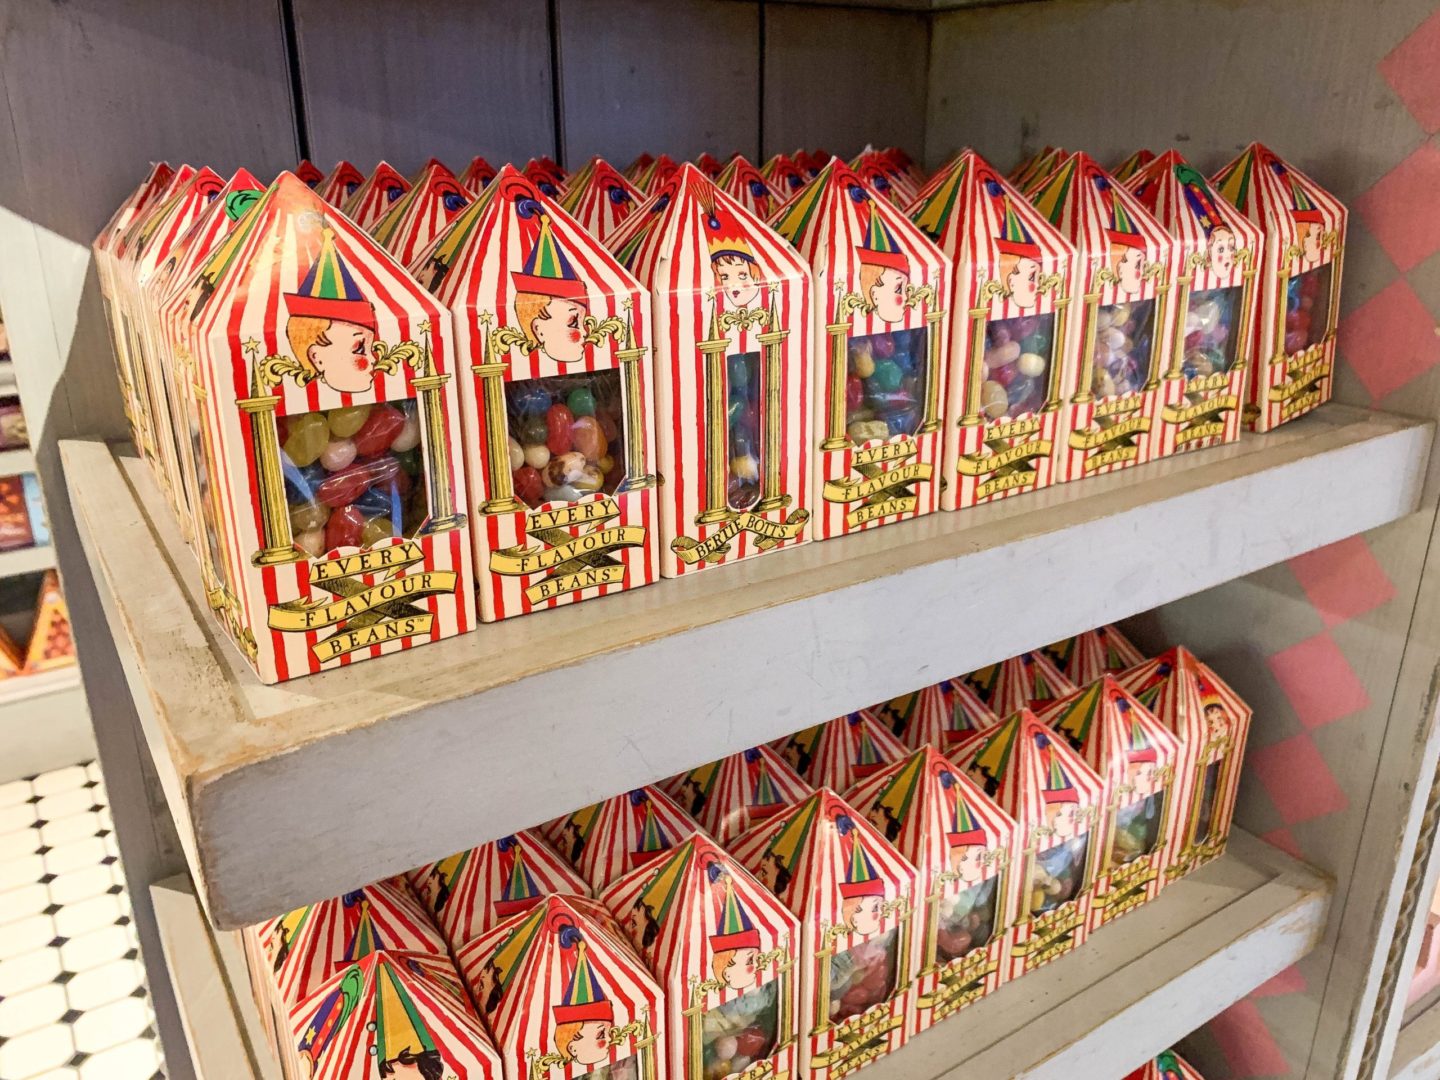 bertie botts every flavour beans on a shelf